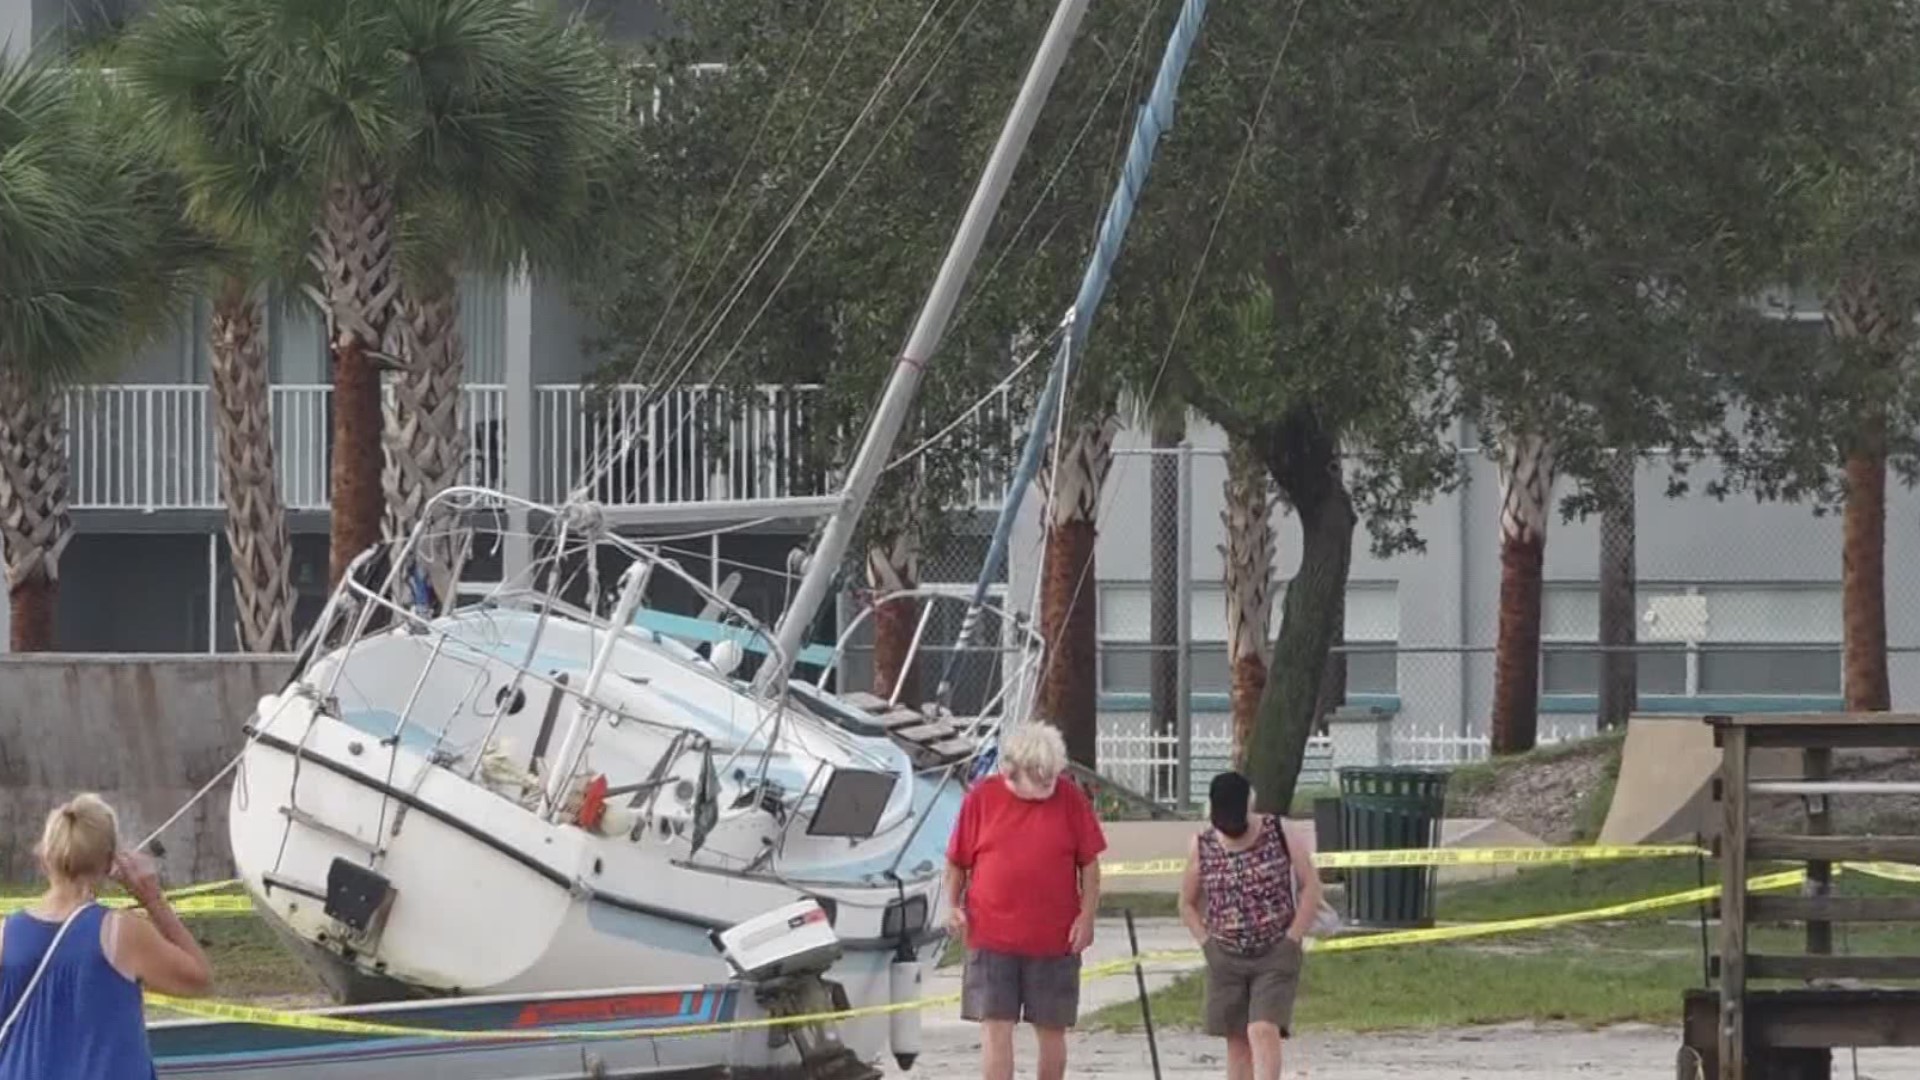 Heavy machinery operators spent the day Monday trying to remove some sailboats blown ashore by the storm.